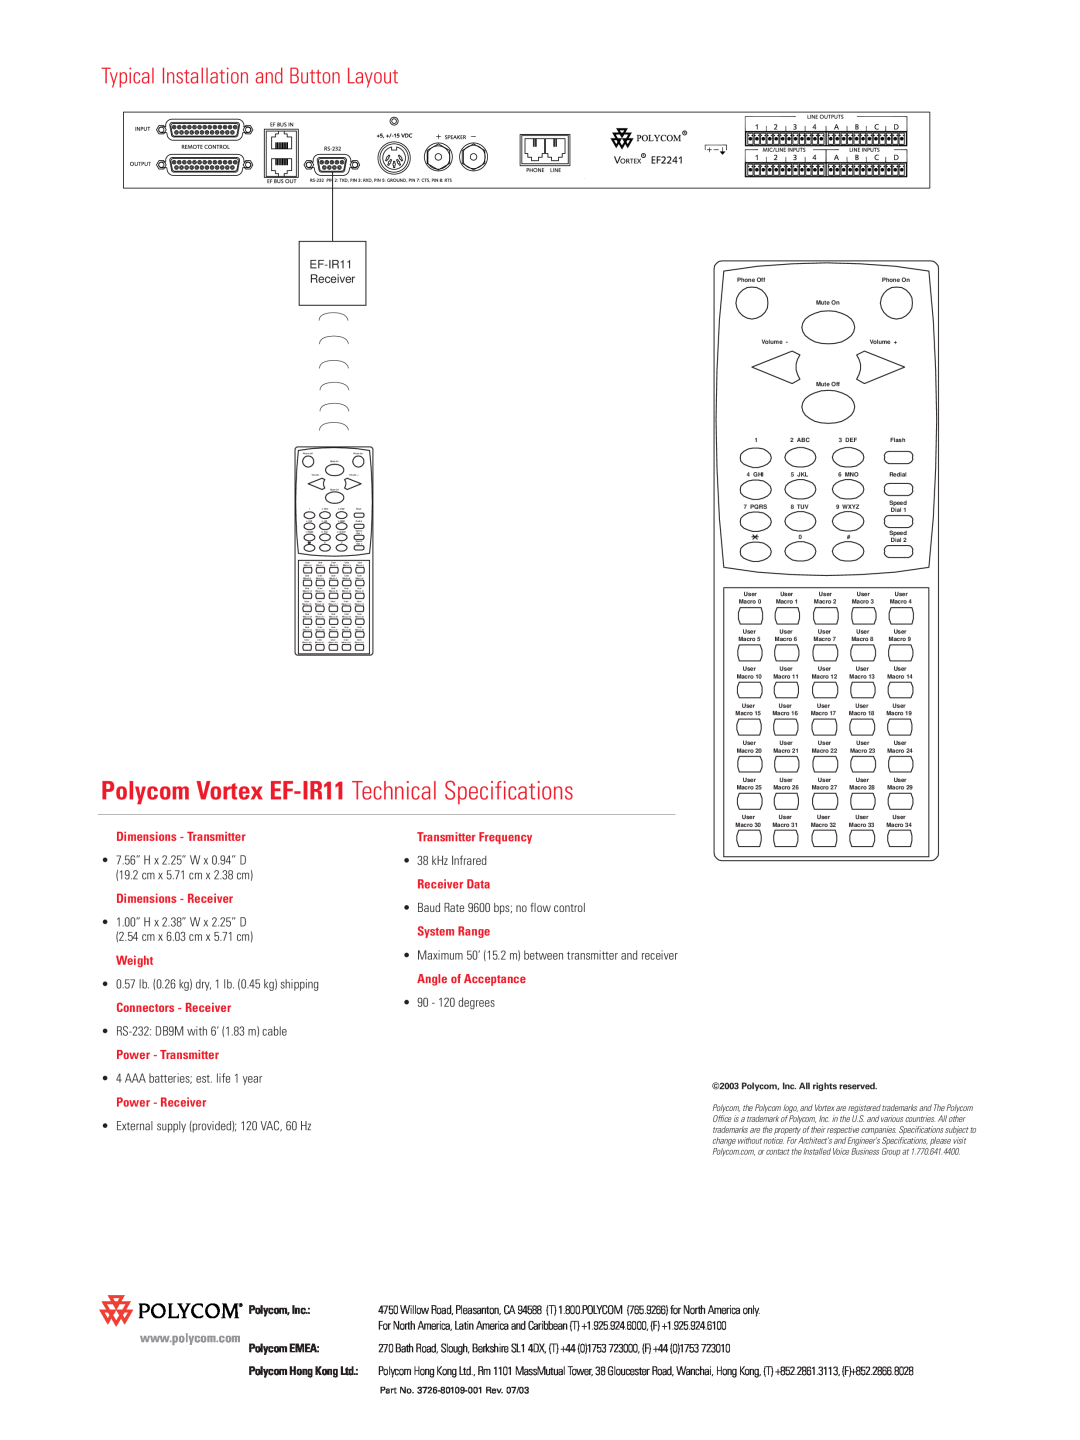 Polycom Polycom Vortex EF-IR11 Technical Specifications, Typical Installation and Button Layout, Dimensions - Receiver 